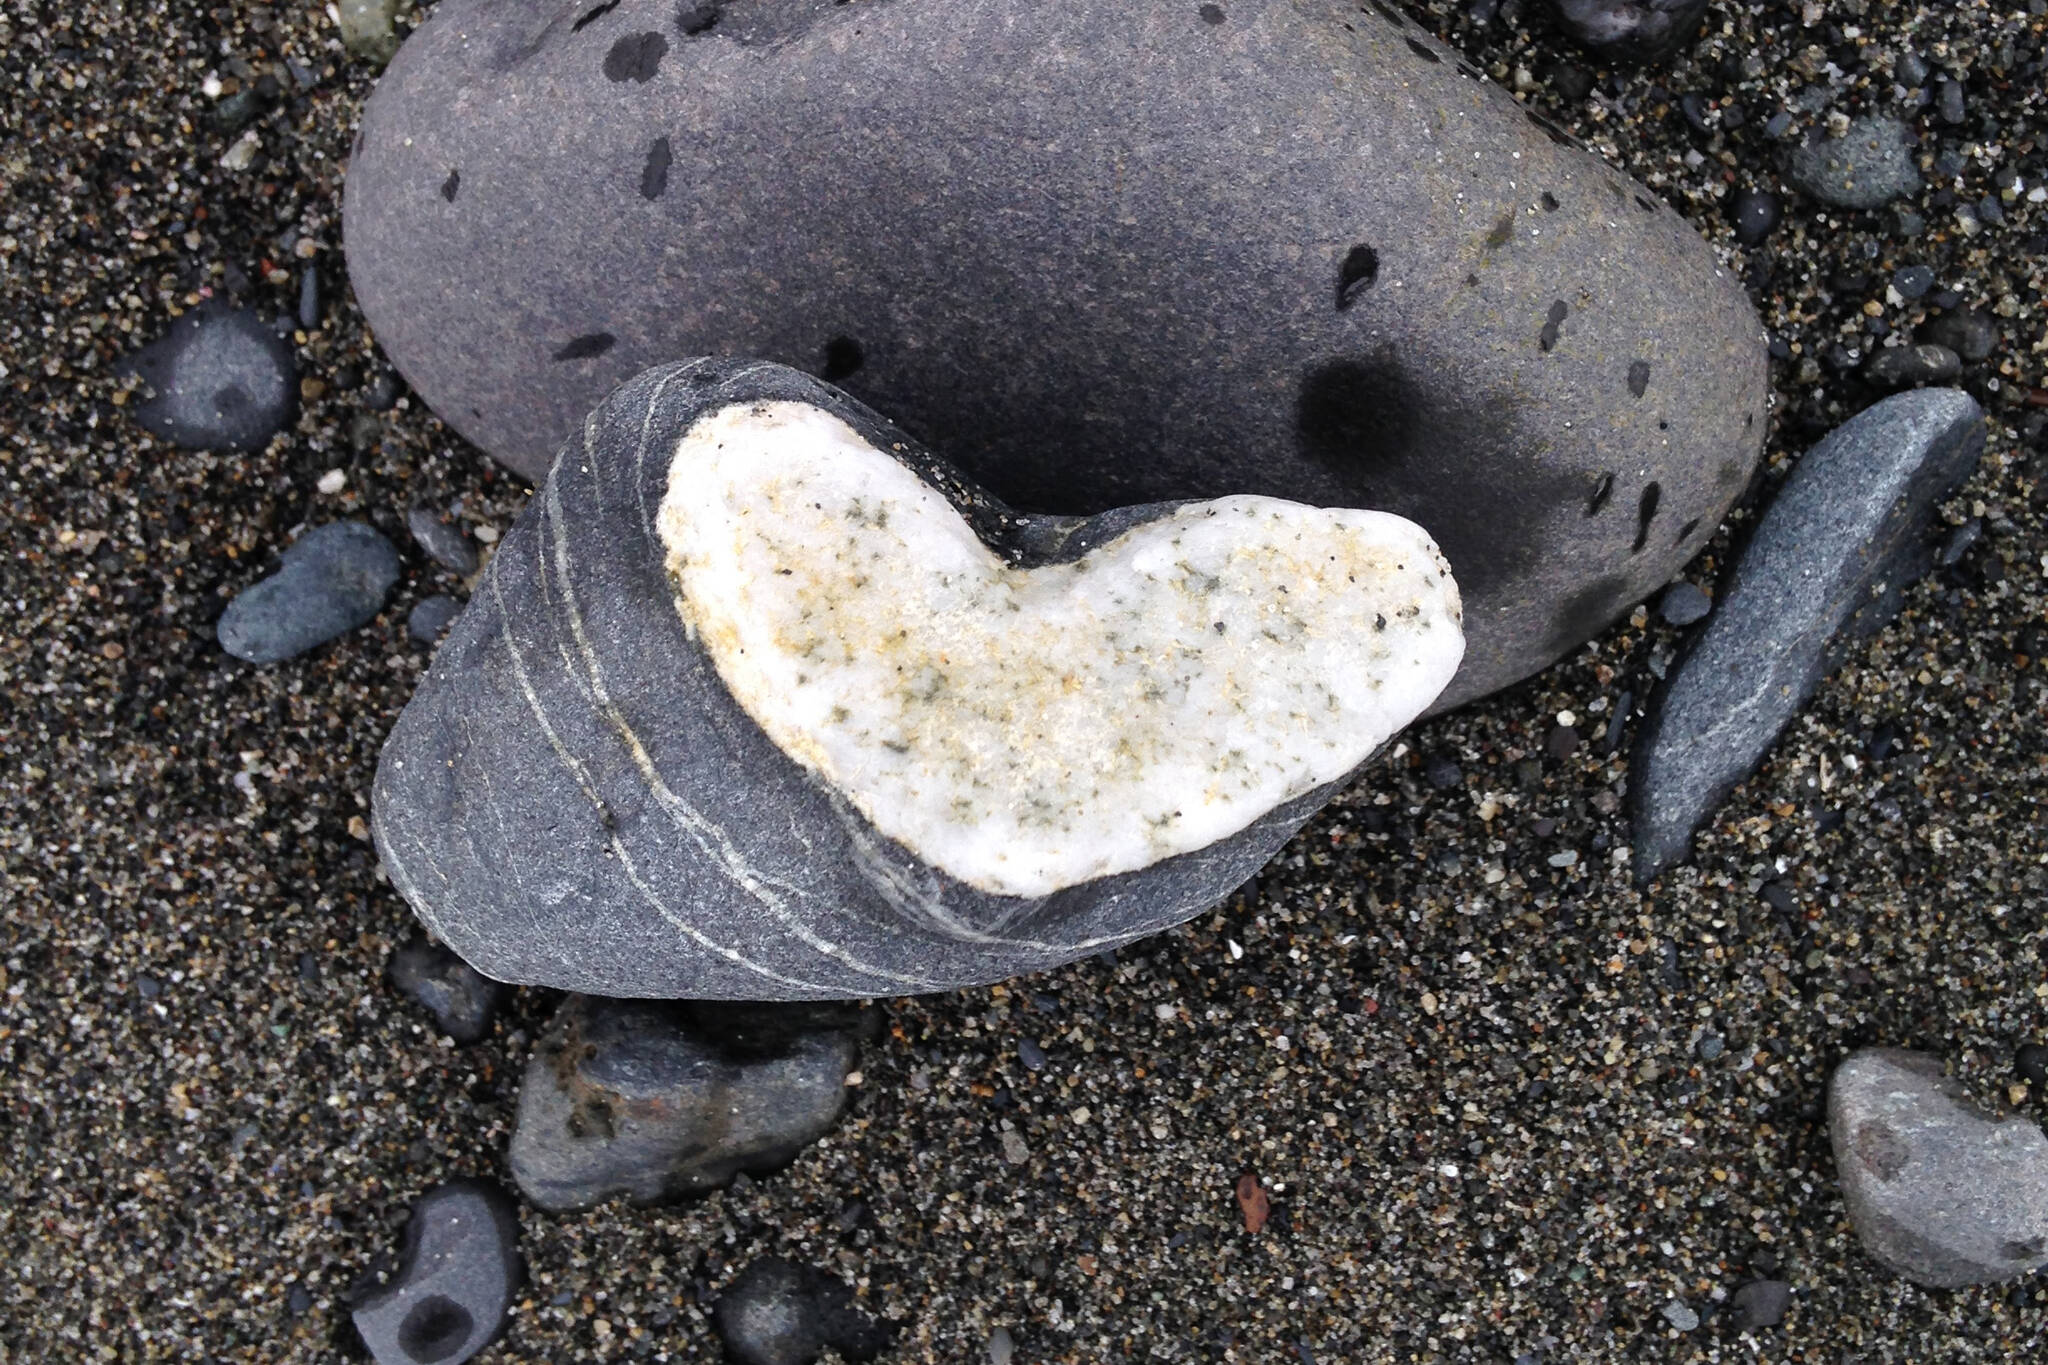 Some heart shaped rocks appear as bands of quartz. (Photo by Michael Armstrong/Homer News)